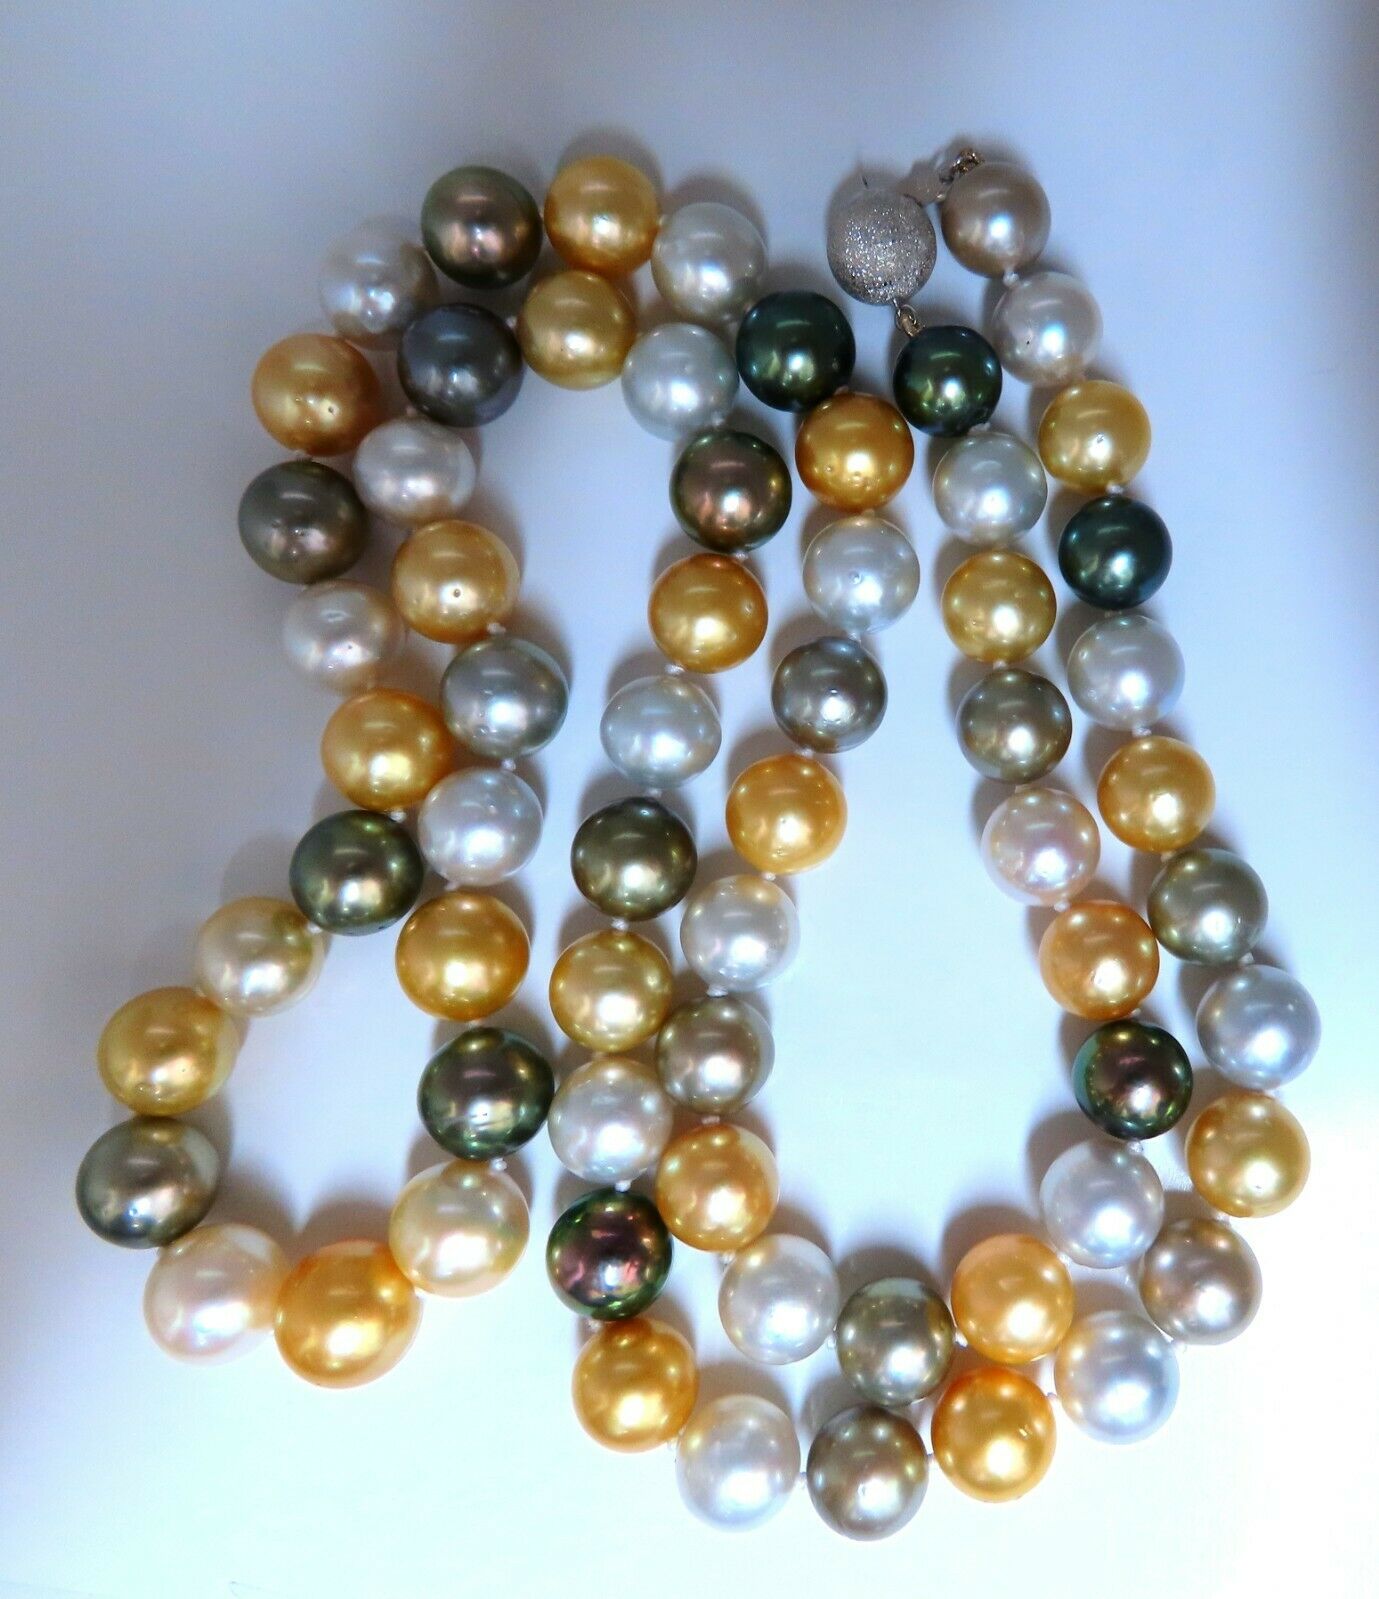 GIA certified Natural Multicolor Tahitian Saltwater Pearls necklace 14.46m 14k